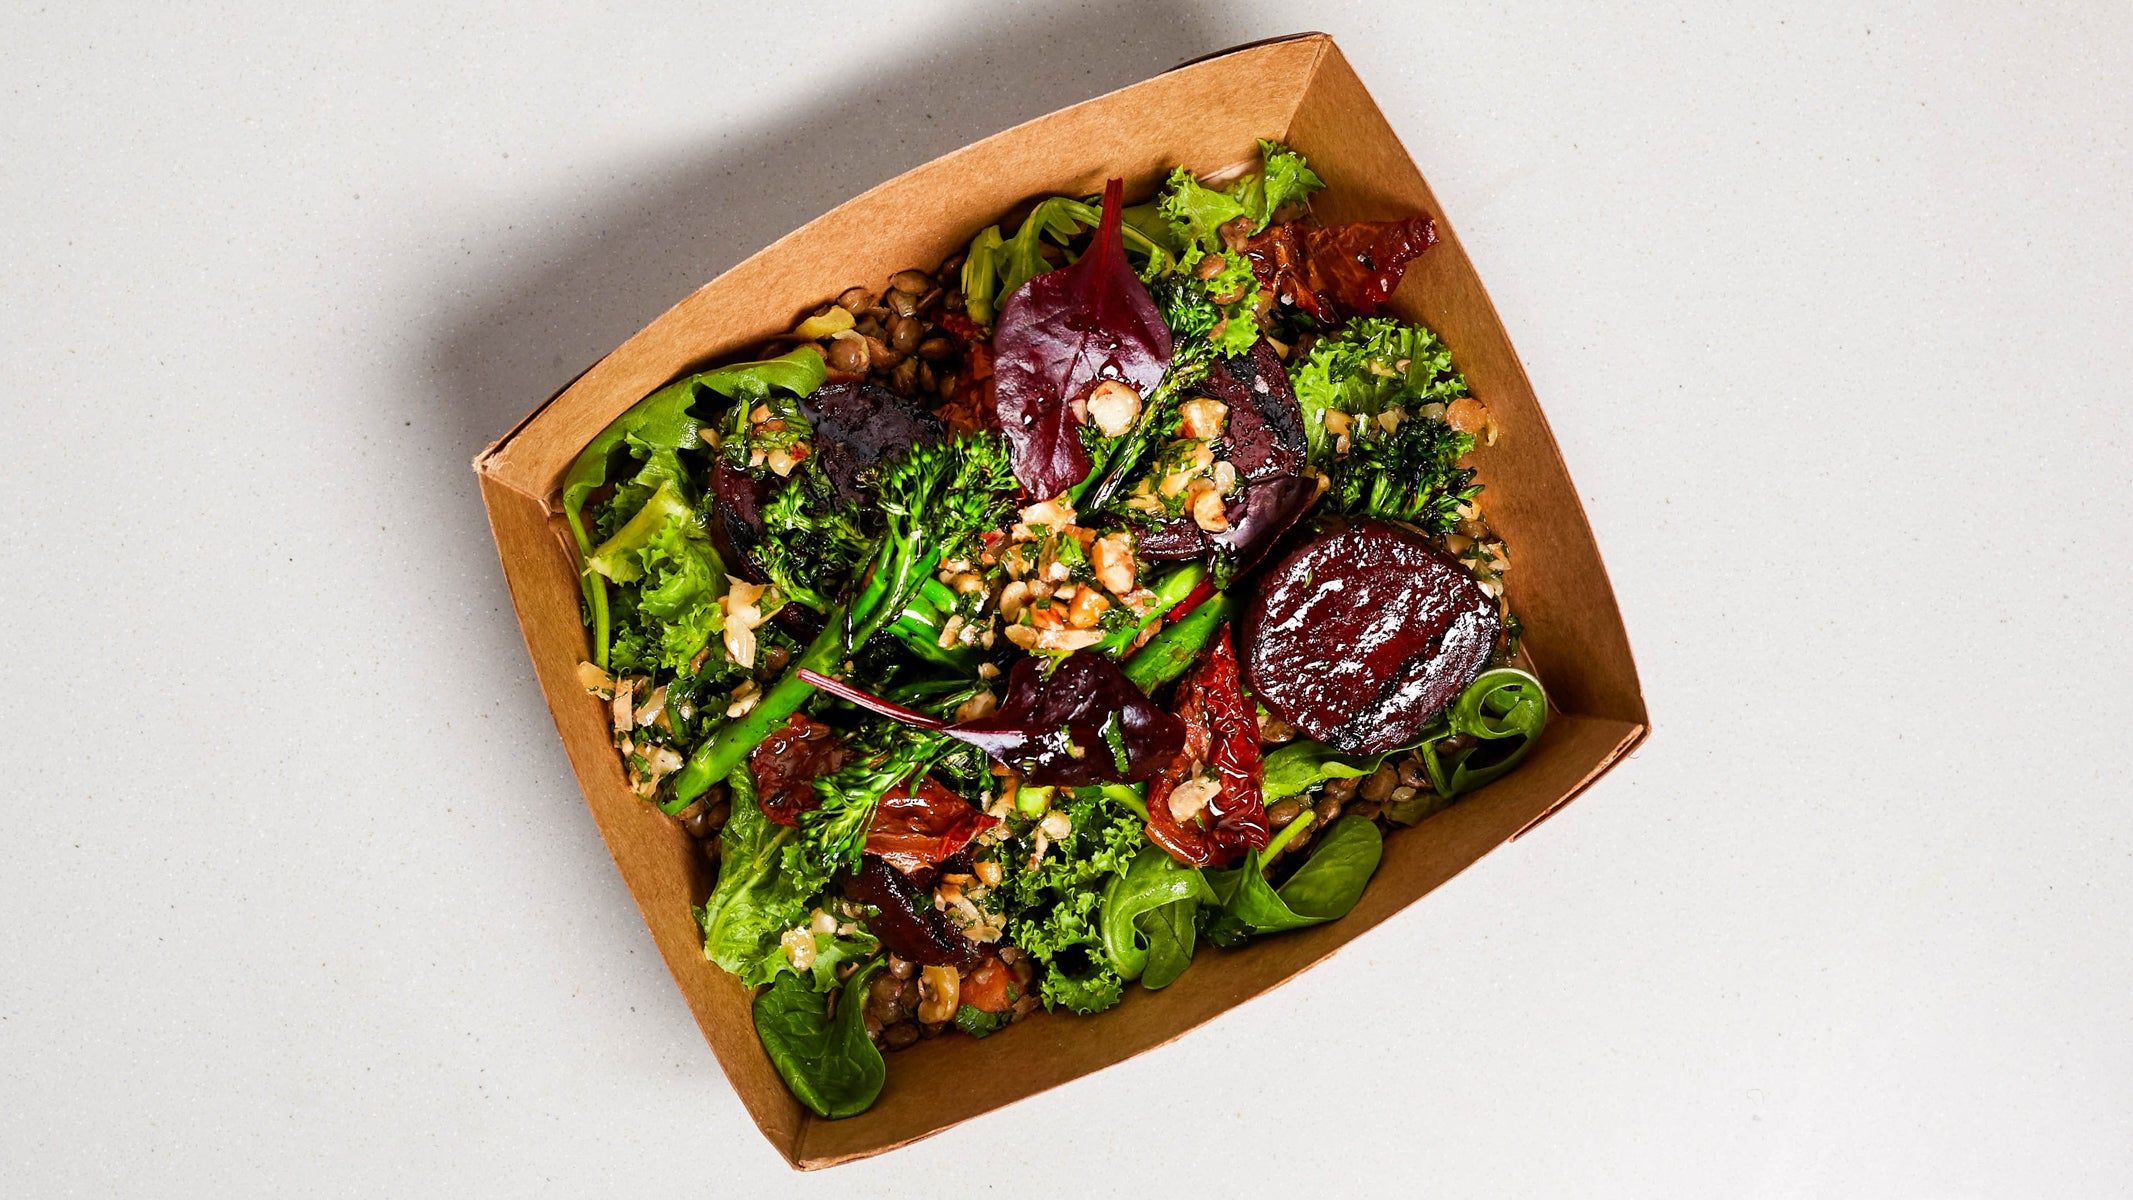 Grilled Sprouting Broccoli & Beets VG